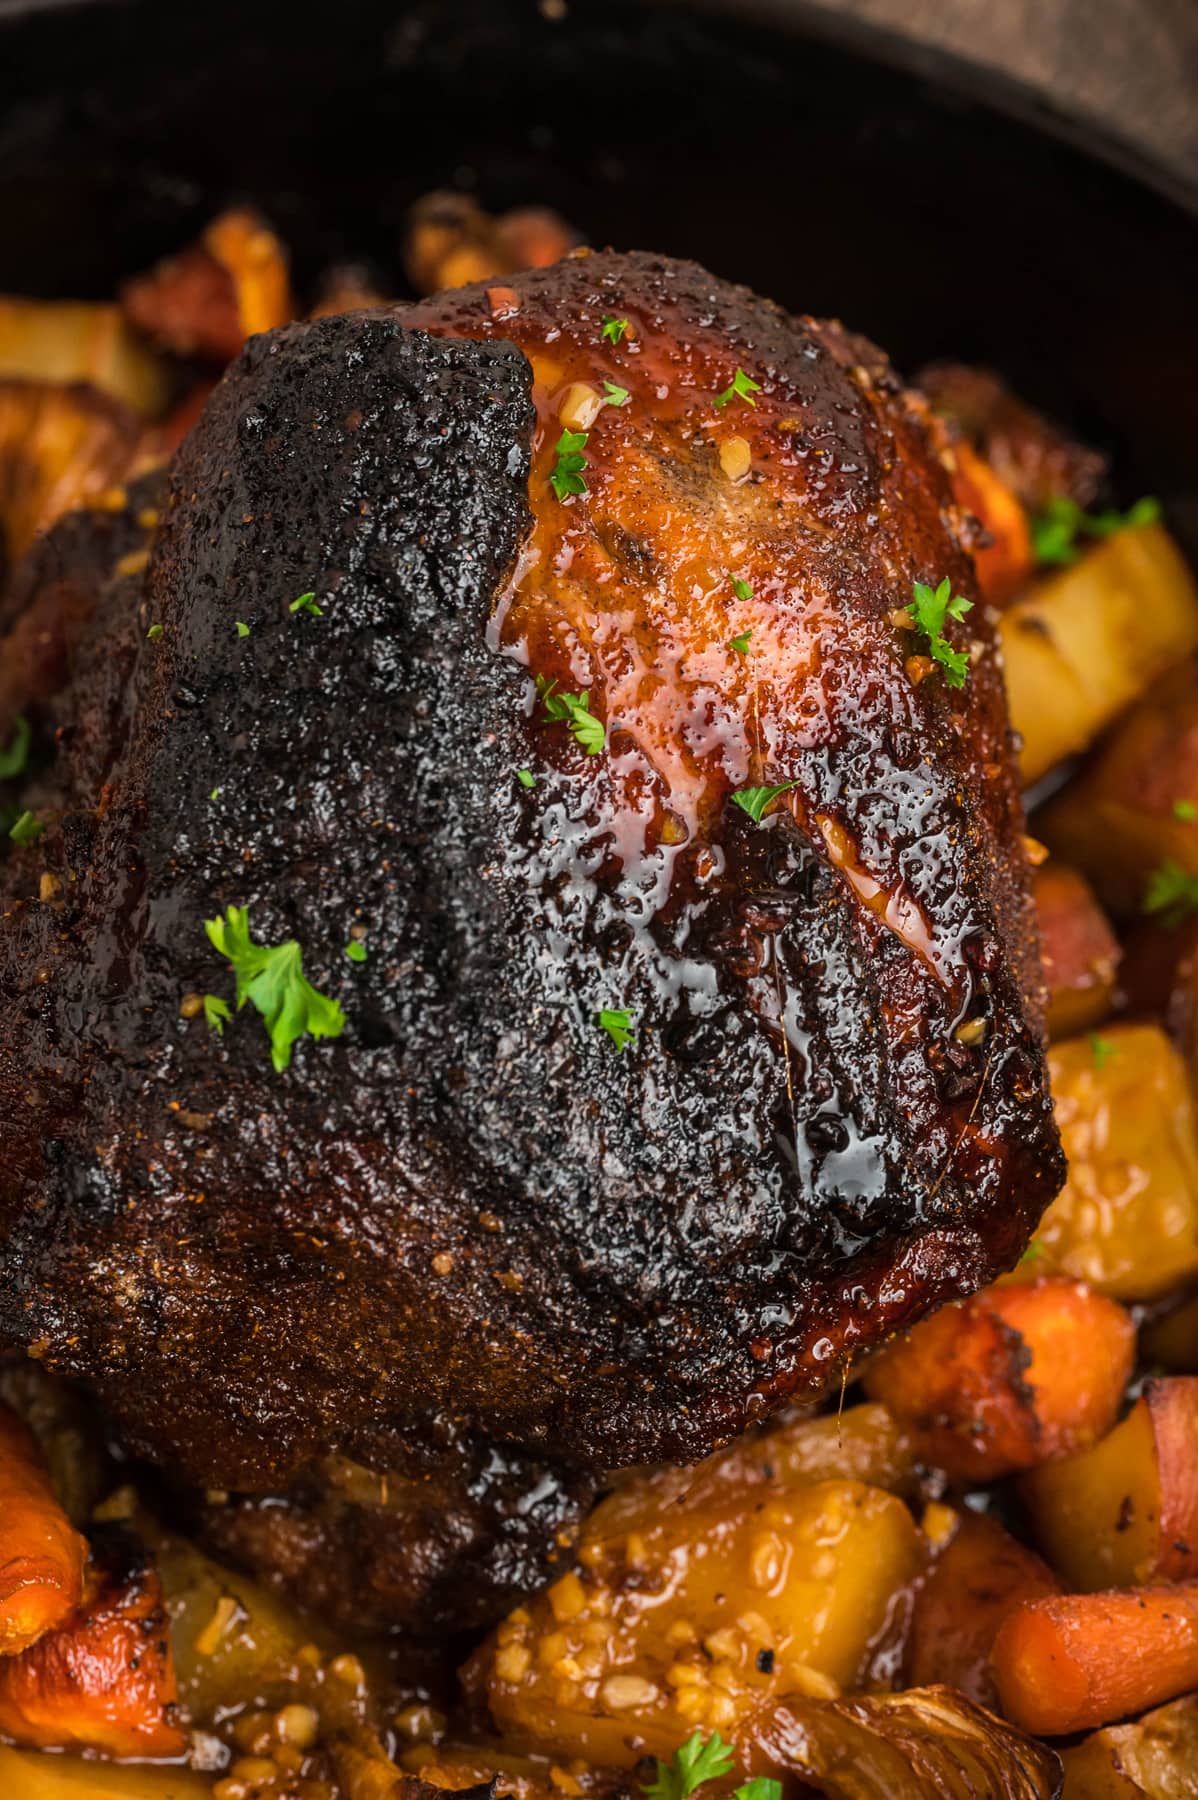 Overhead view of a pork shoulder roasted in a skillet with vegetables